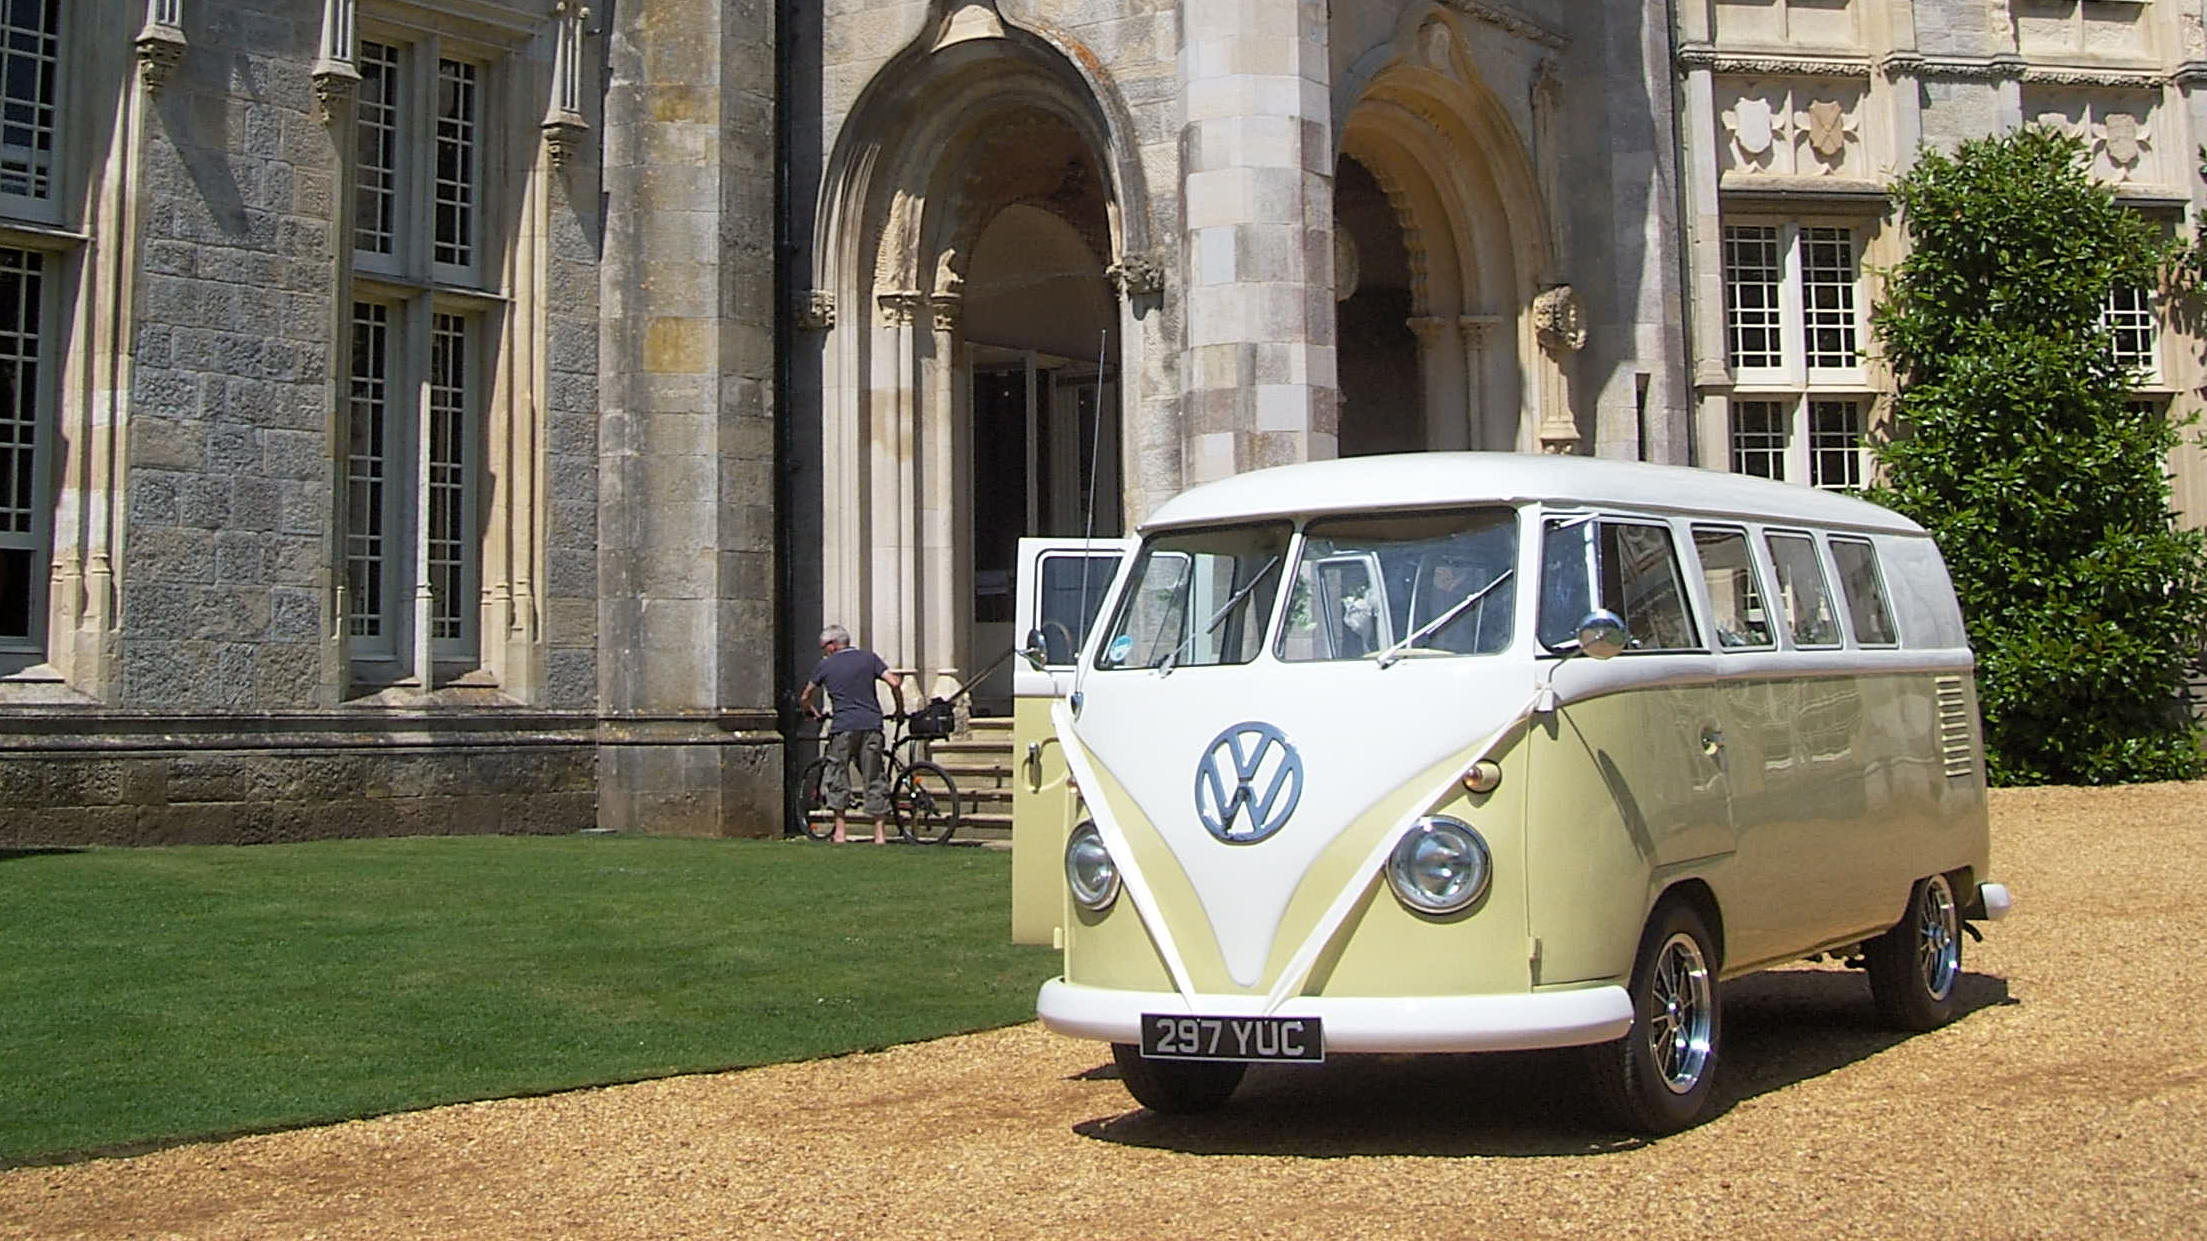 Retro Classic Volkswagen Campervan decorated with white ribbons at a local Cranborne wedding venue.